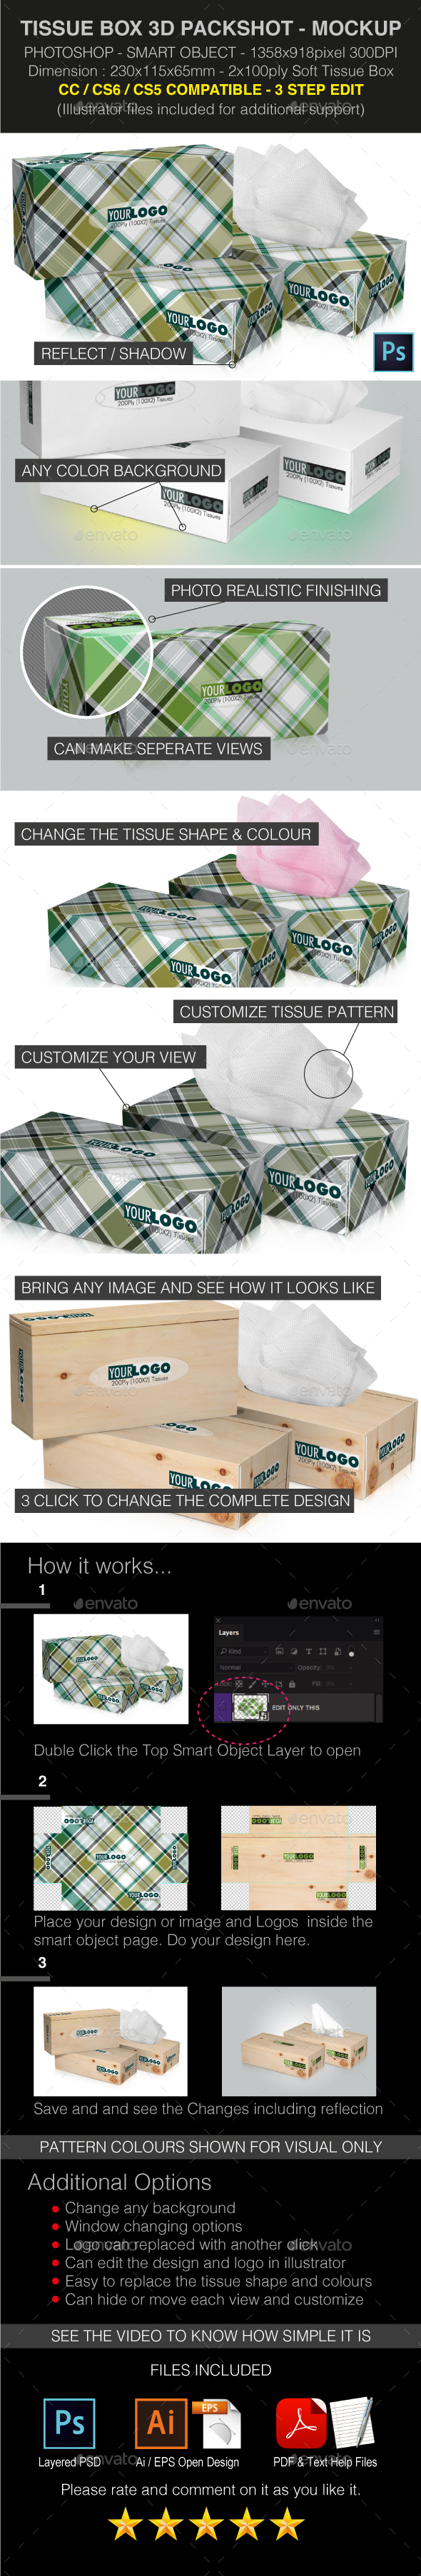 Tissue Box 3D Perspective Mockups PSD